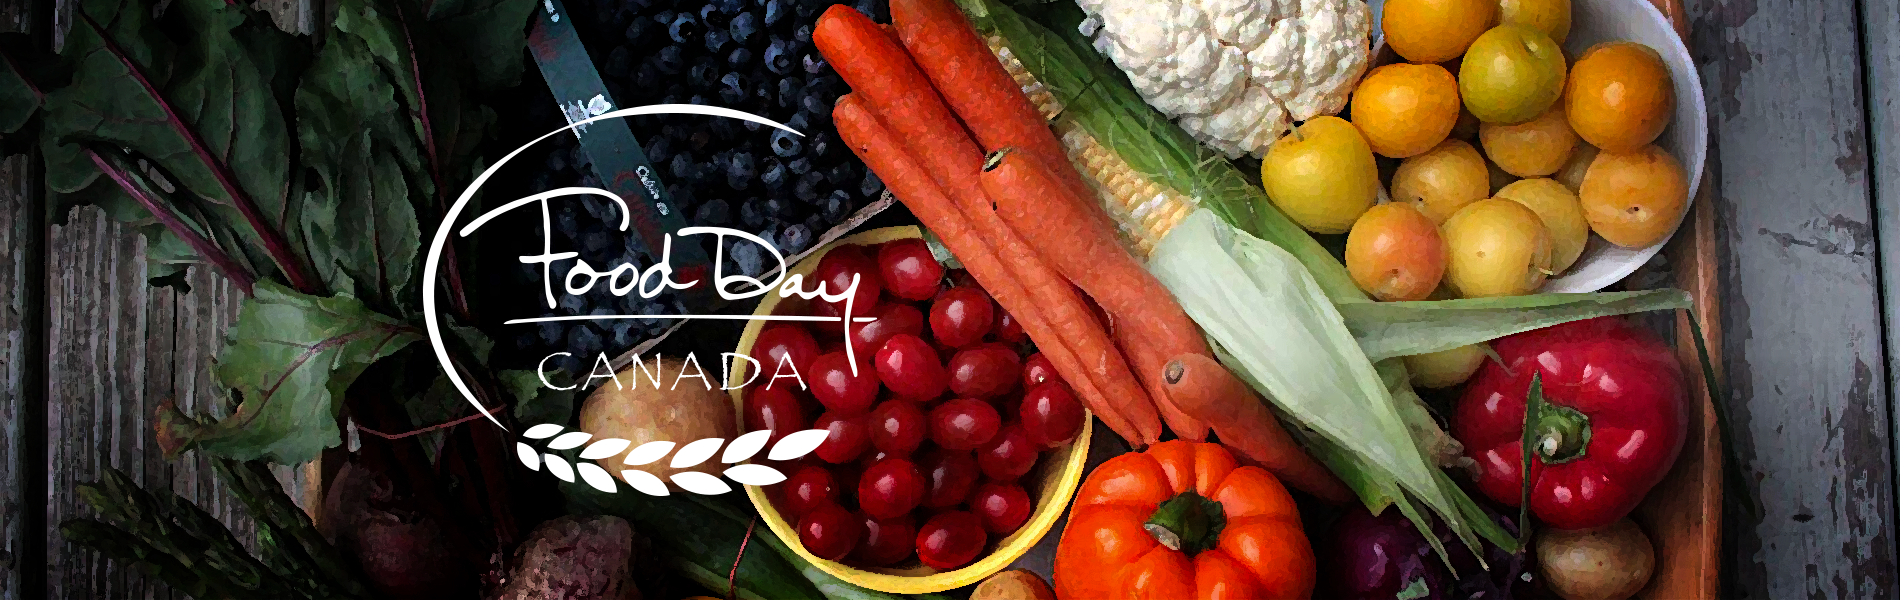 A tray of fruits and vegetables on a grey, wooden background. The Food Day Canada is overlaid on top